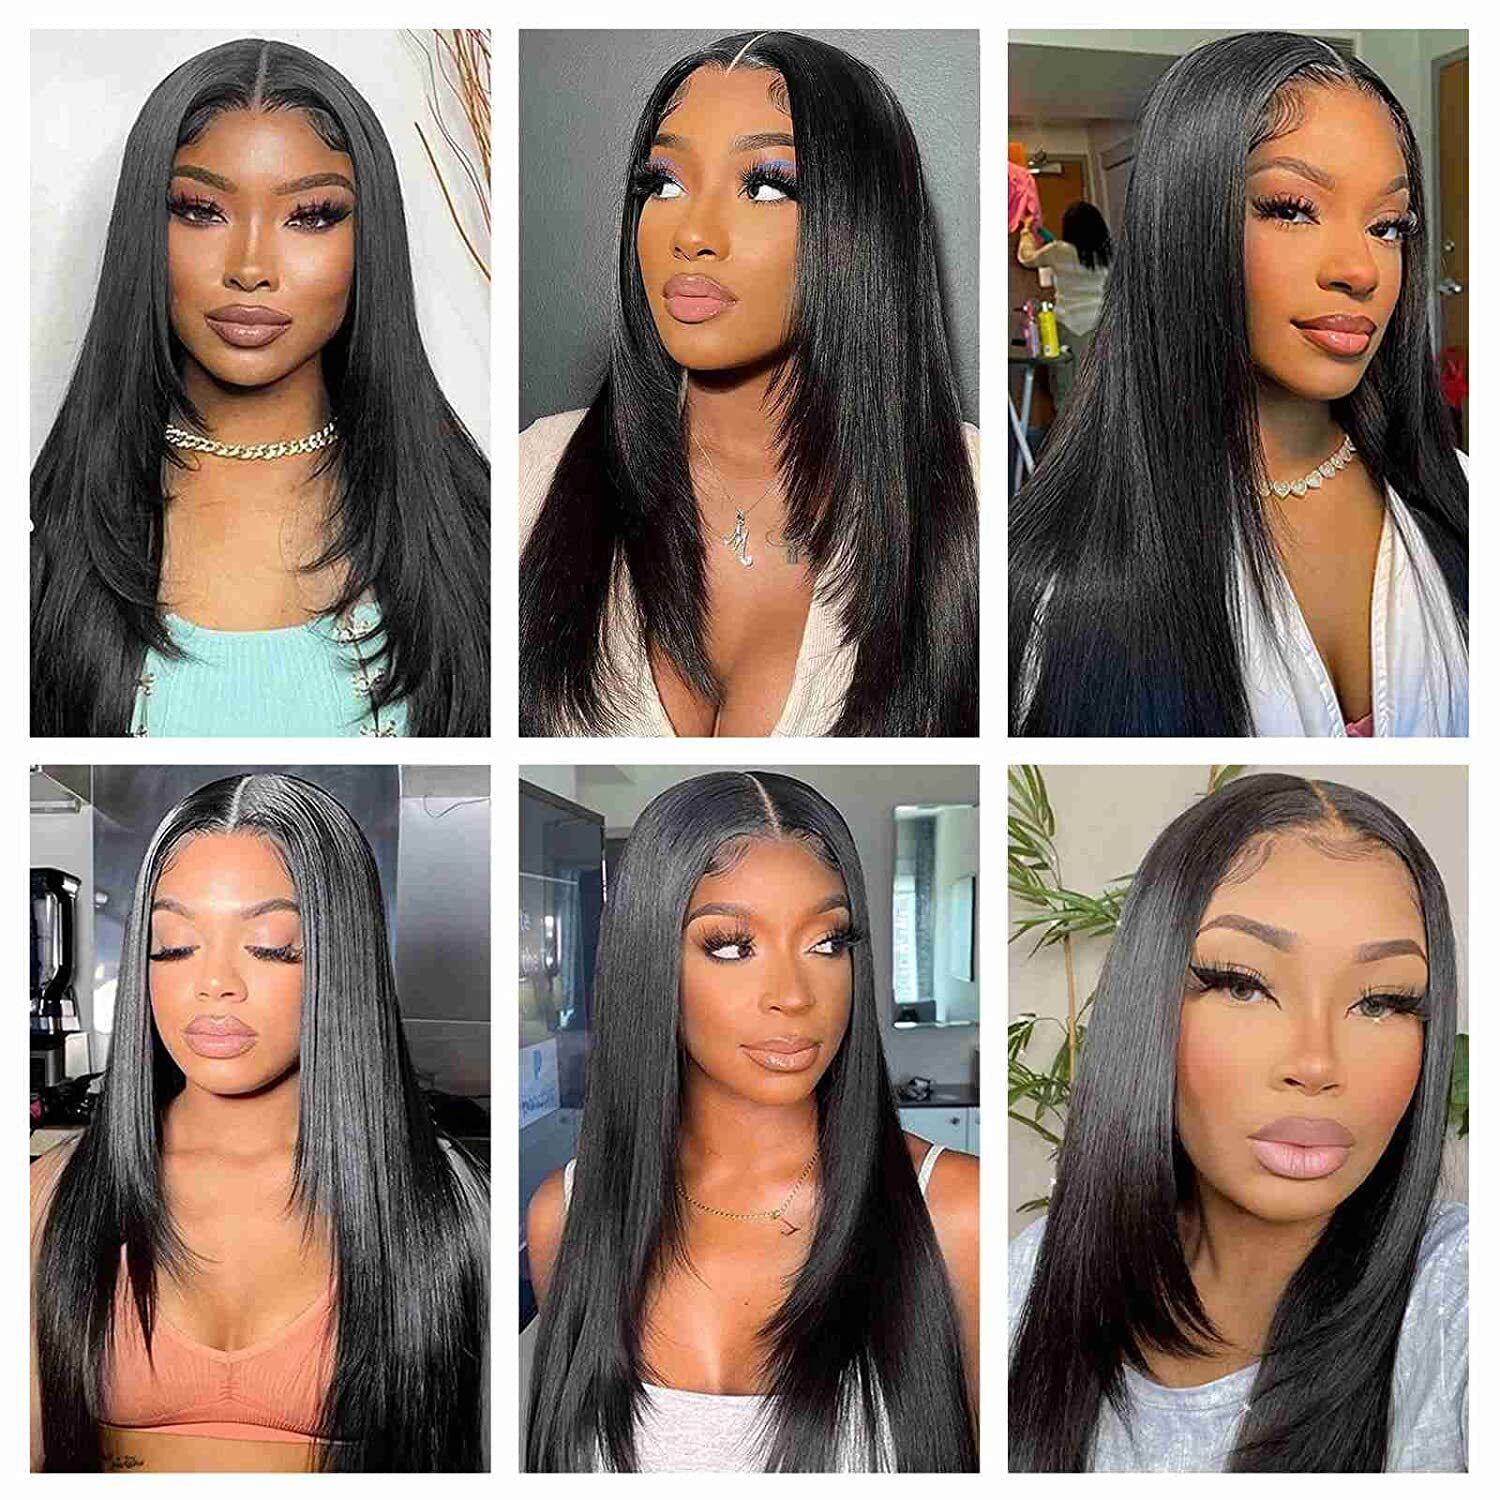 Human Hair Layered Cut Lace Wig for Women 180% Density Straight Lace Front  Wig | eBay